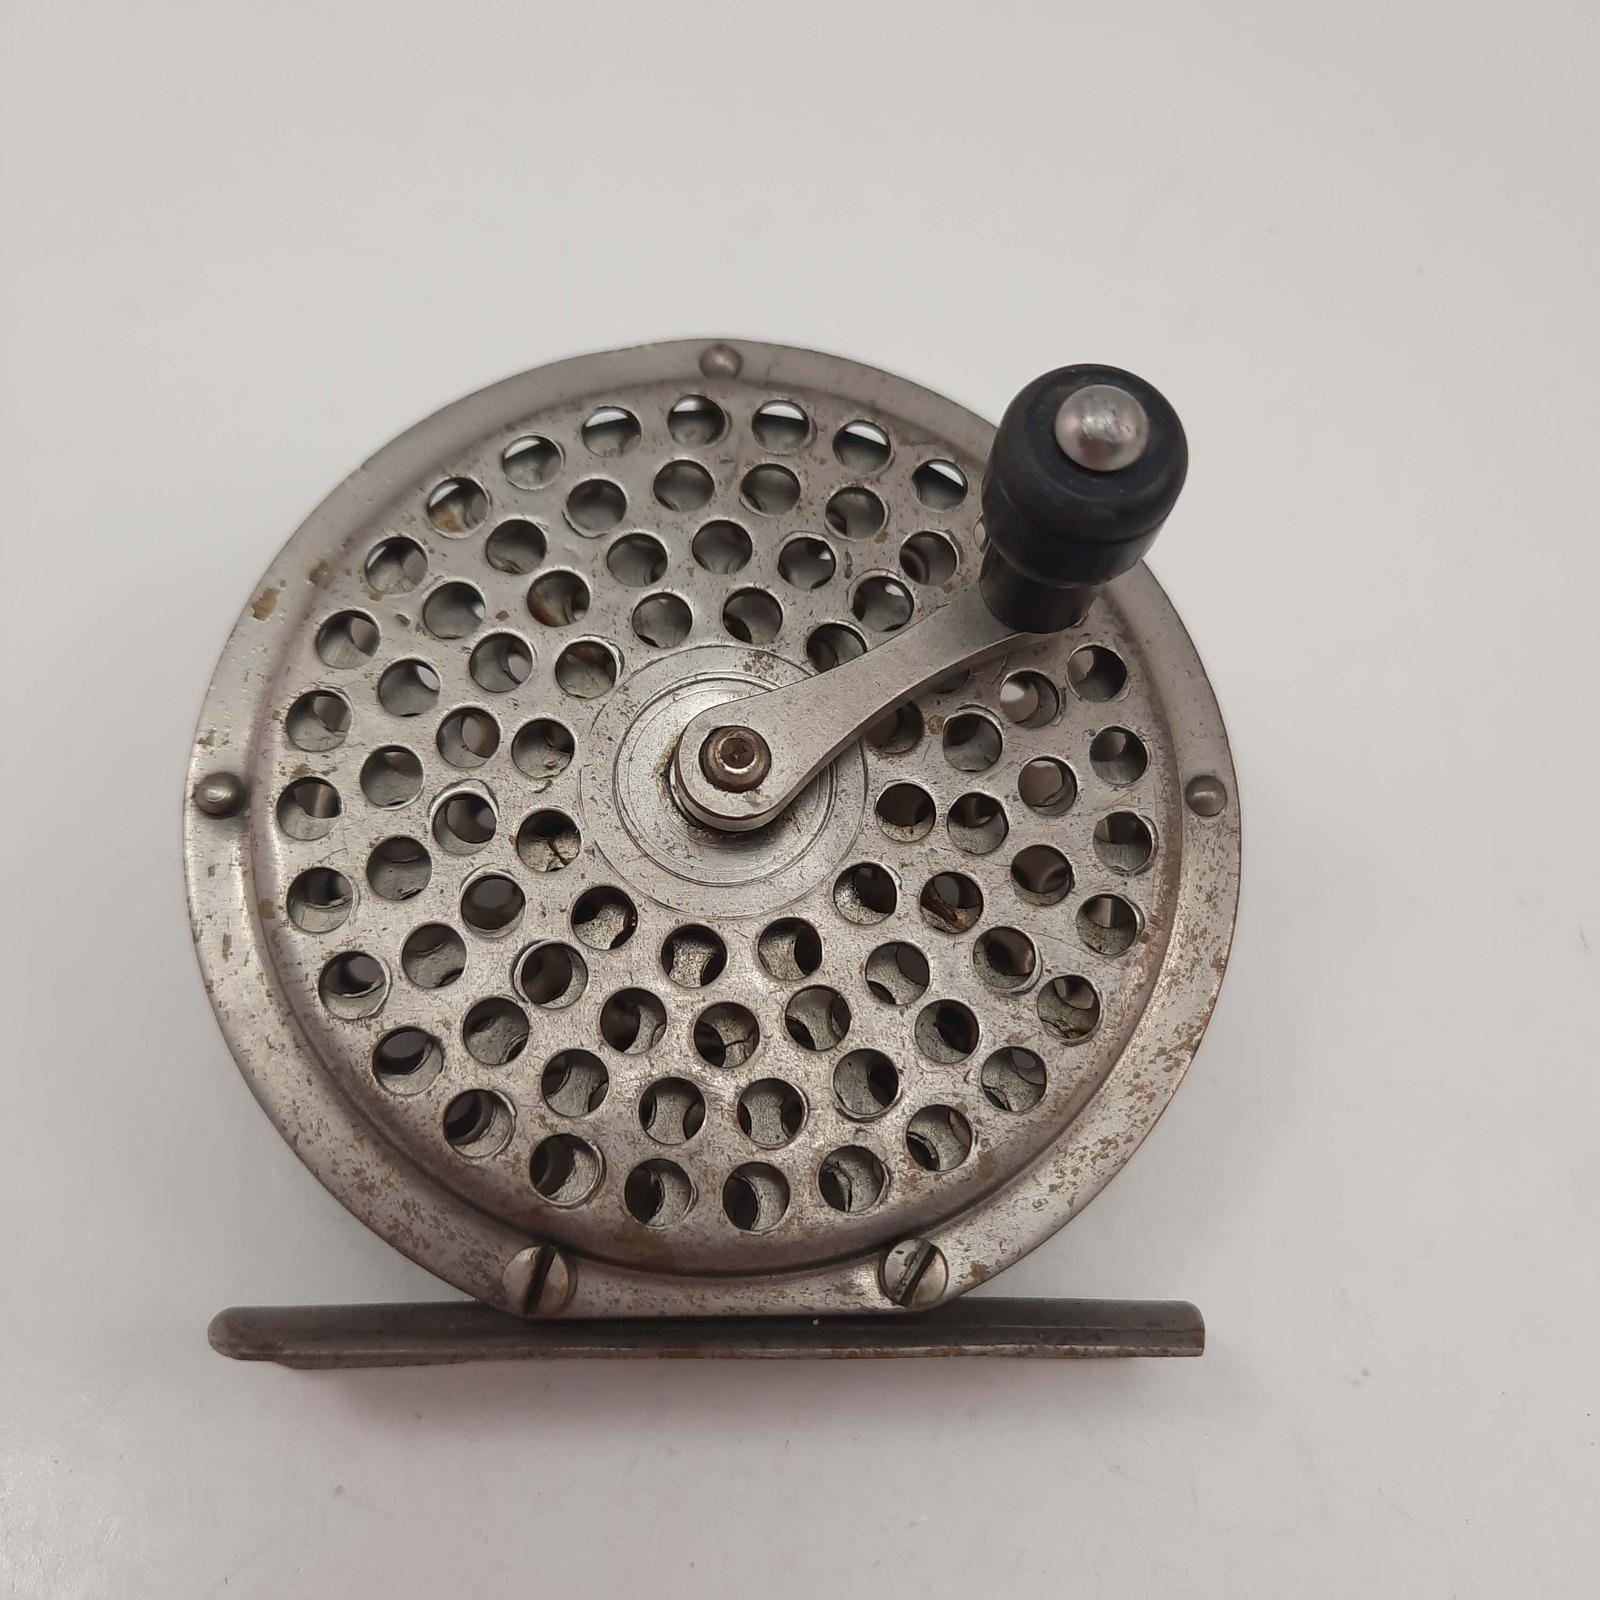 C.F. Orvis Fly Reel Patented 1874